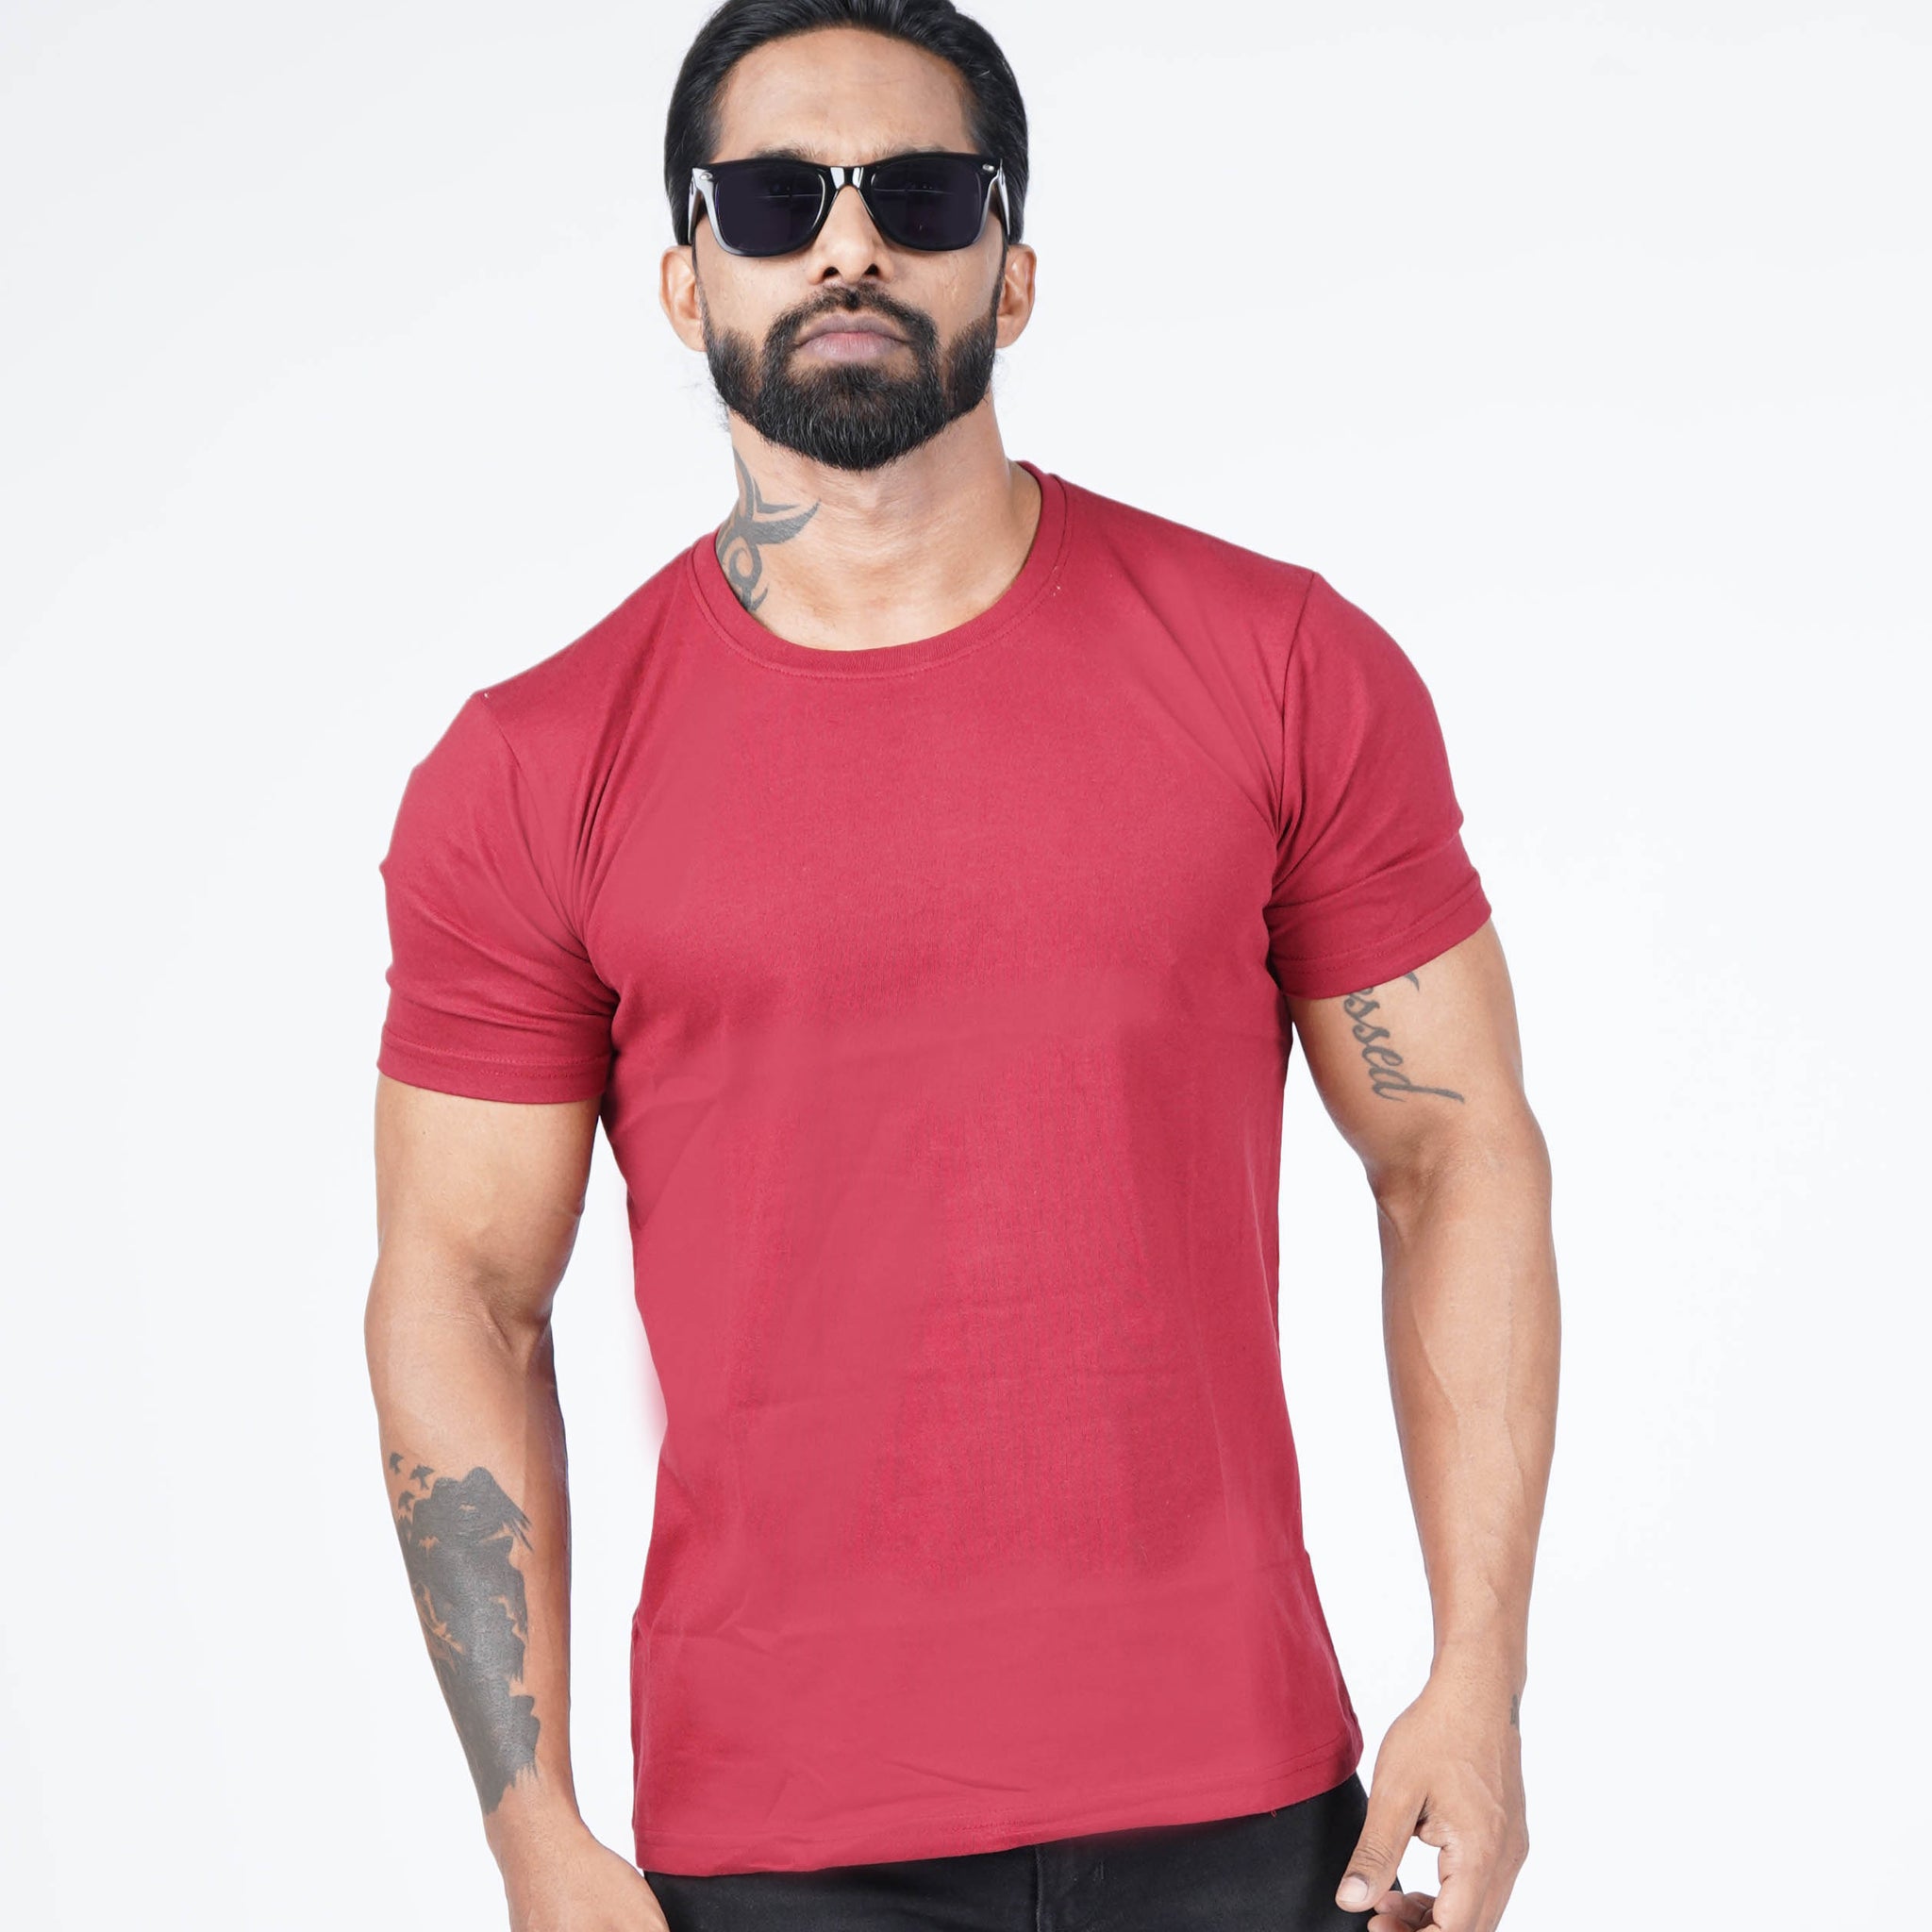 Maroon Solid T-shirt Crew Cut/Round Neck Short Sleeves